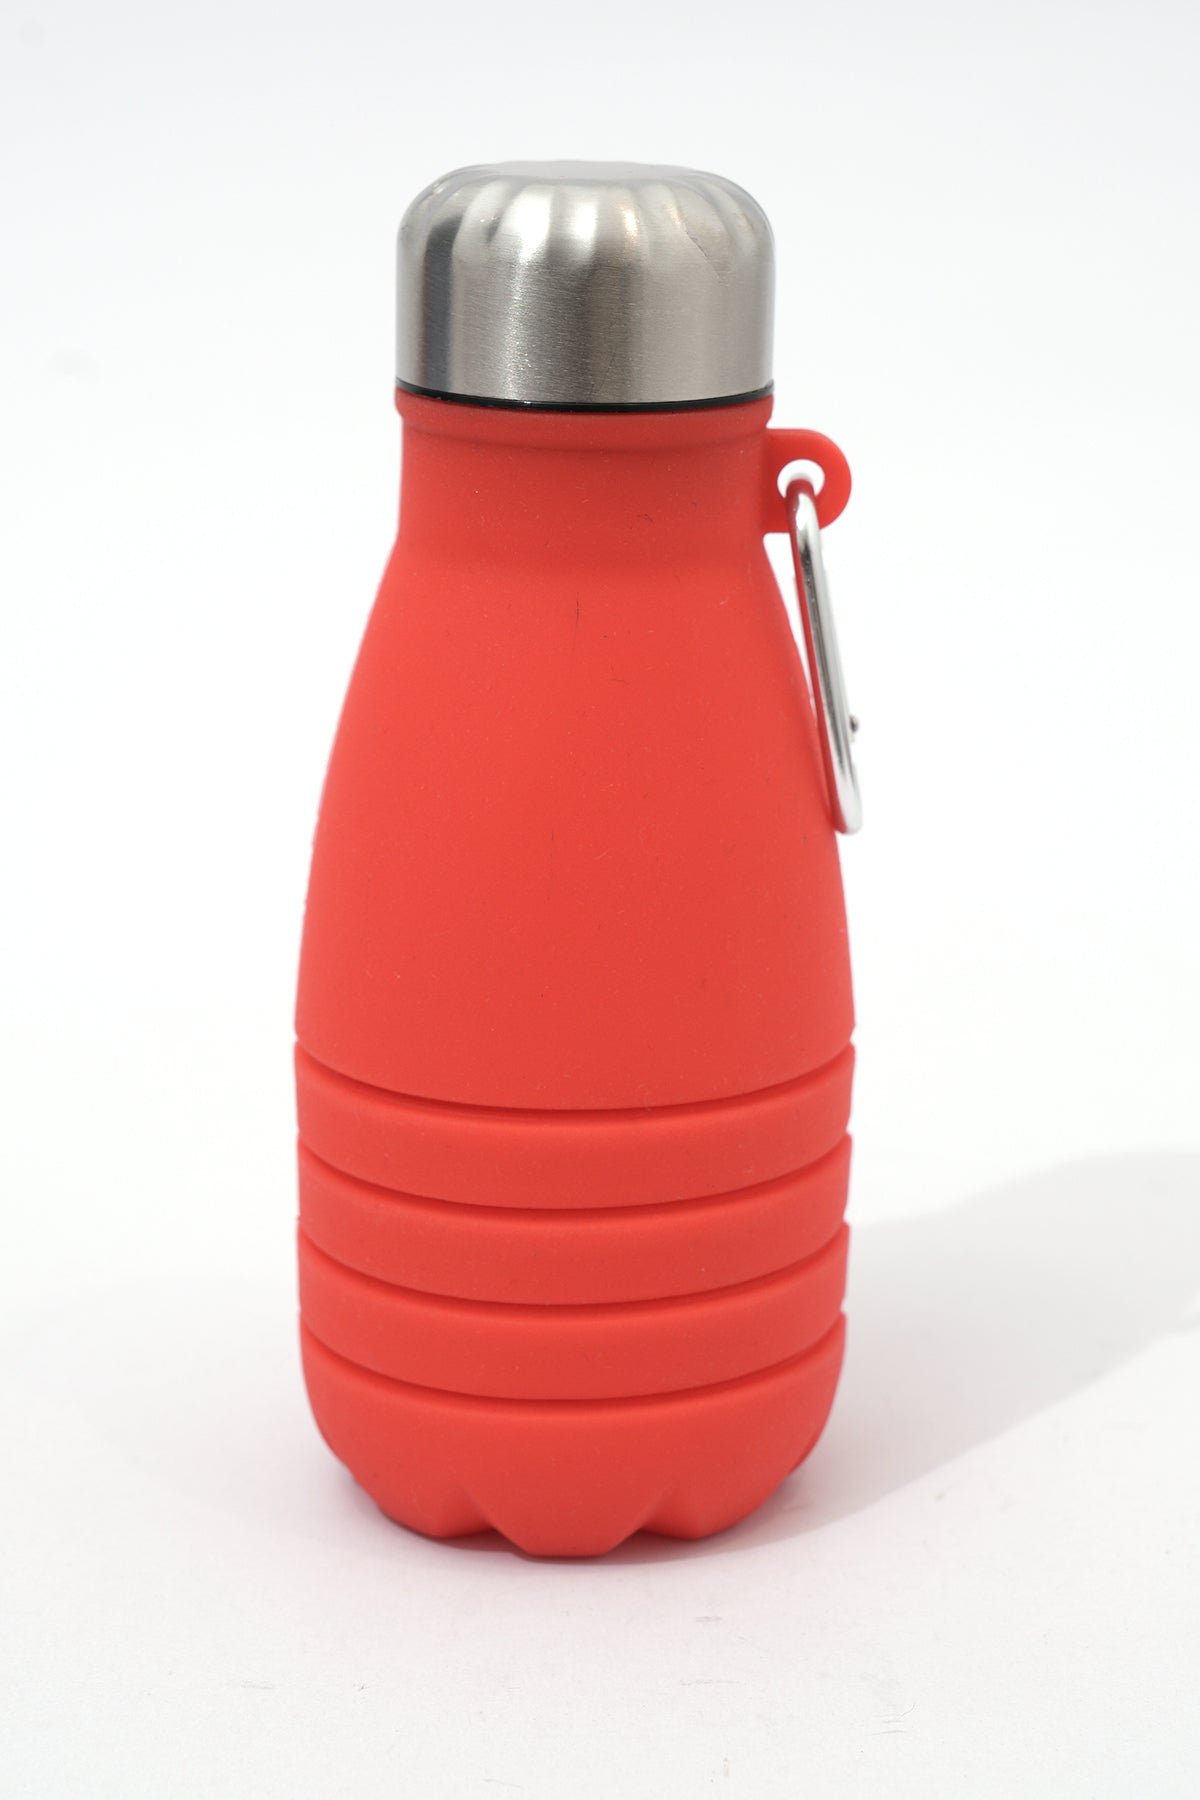 Silicon Water Bottle